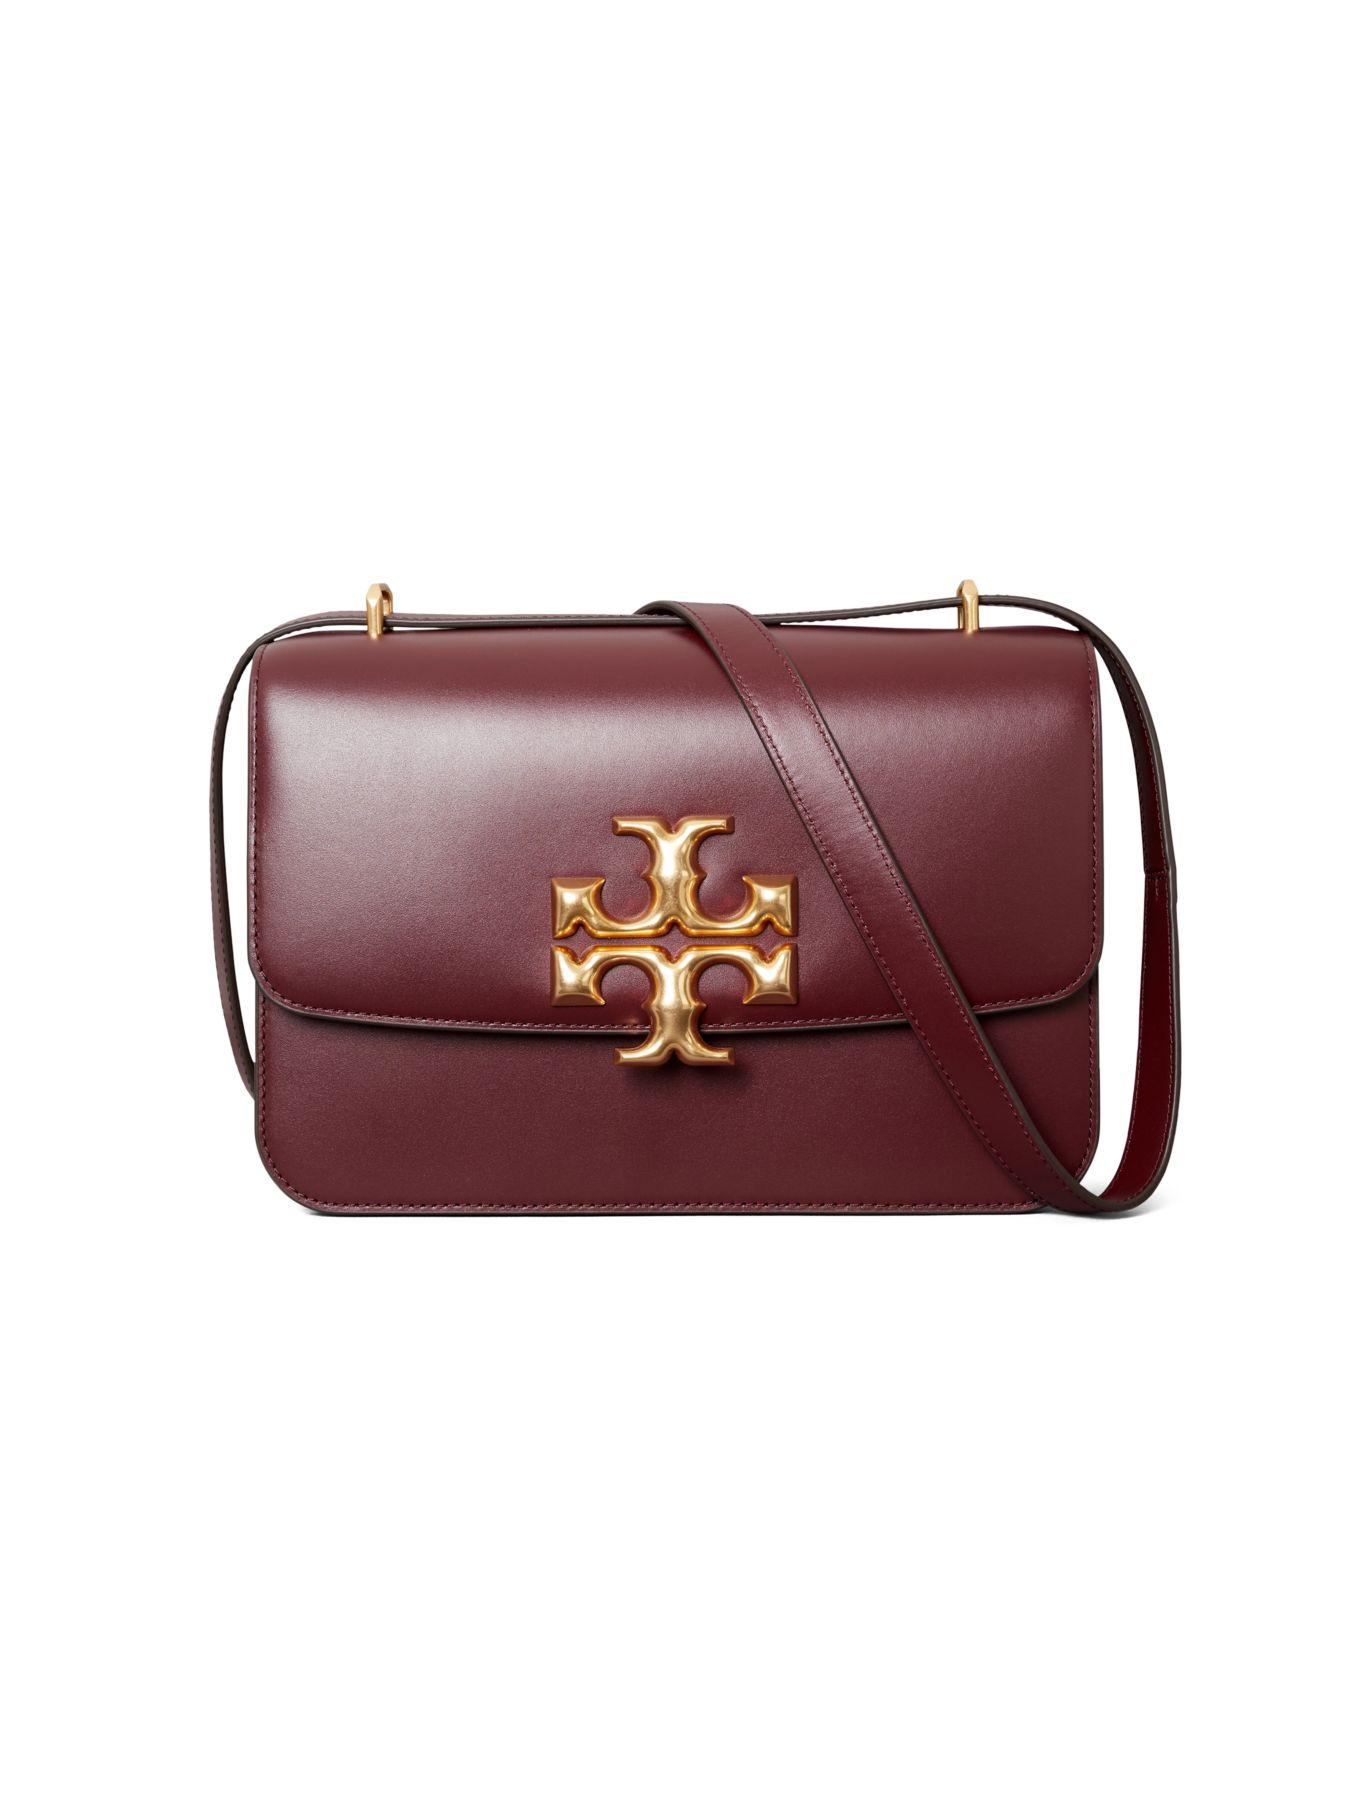 Tory Burch Eleanor Convertible Leather Shoulder Bag in Claret (Red) - Lyst